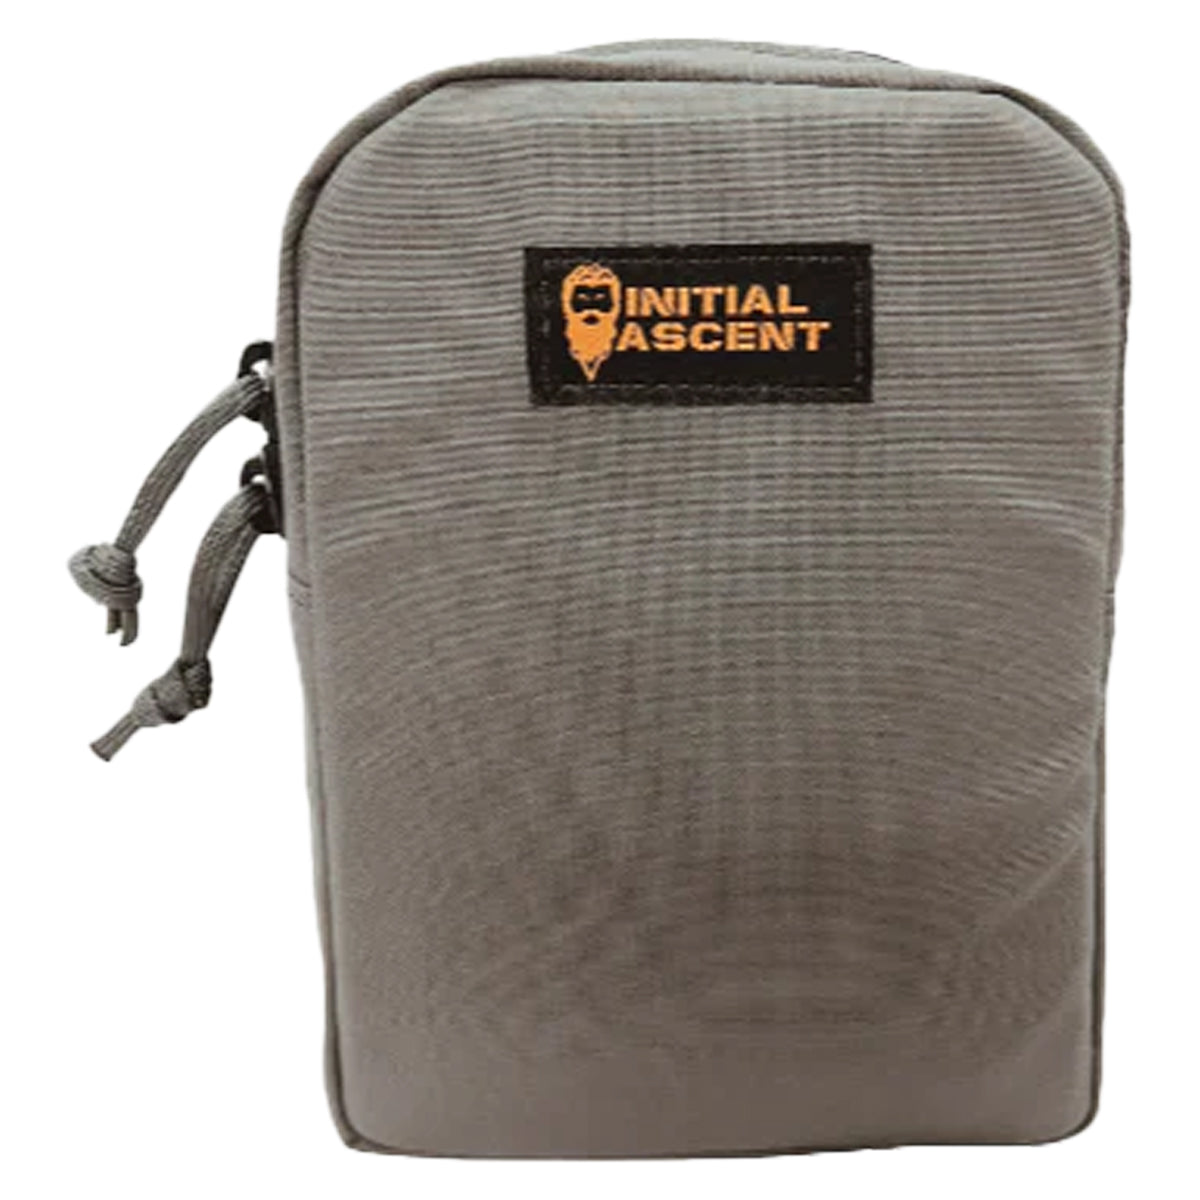 Initial Ascent Hip Belt Pouch in  by GOHUNT | Initial Ascent - GOHUNT Shop